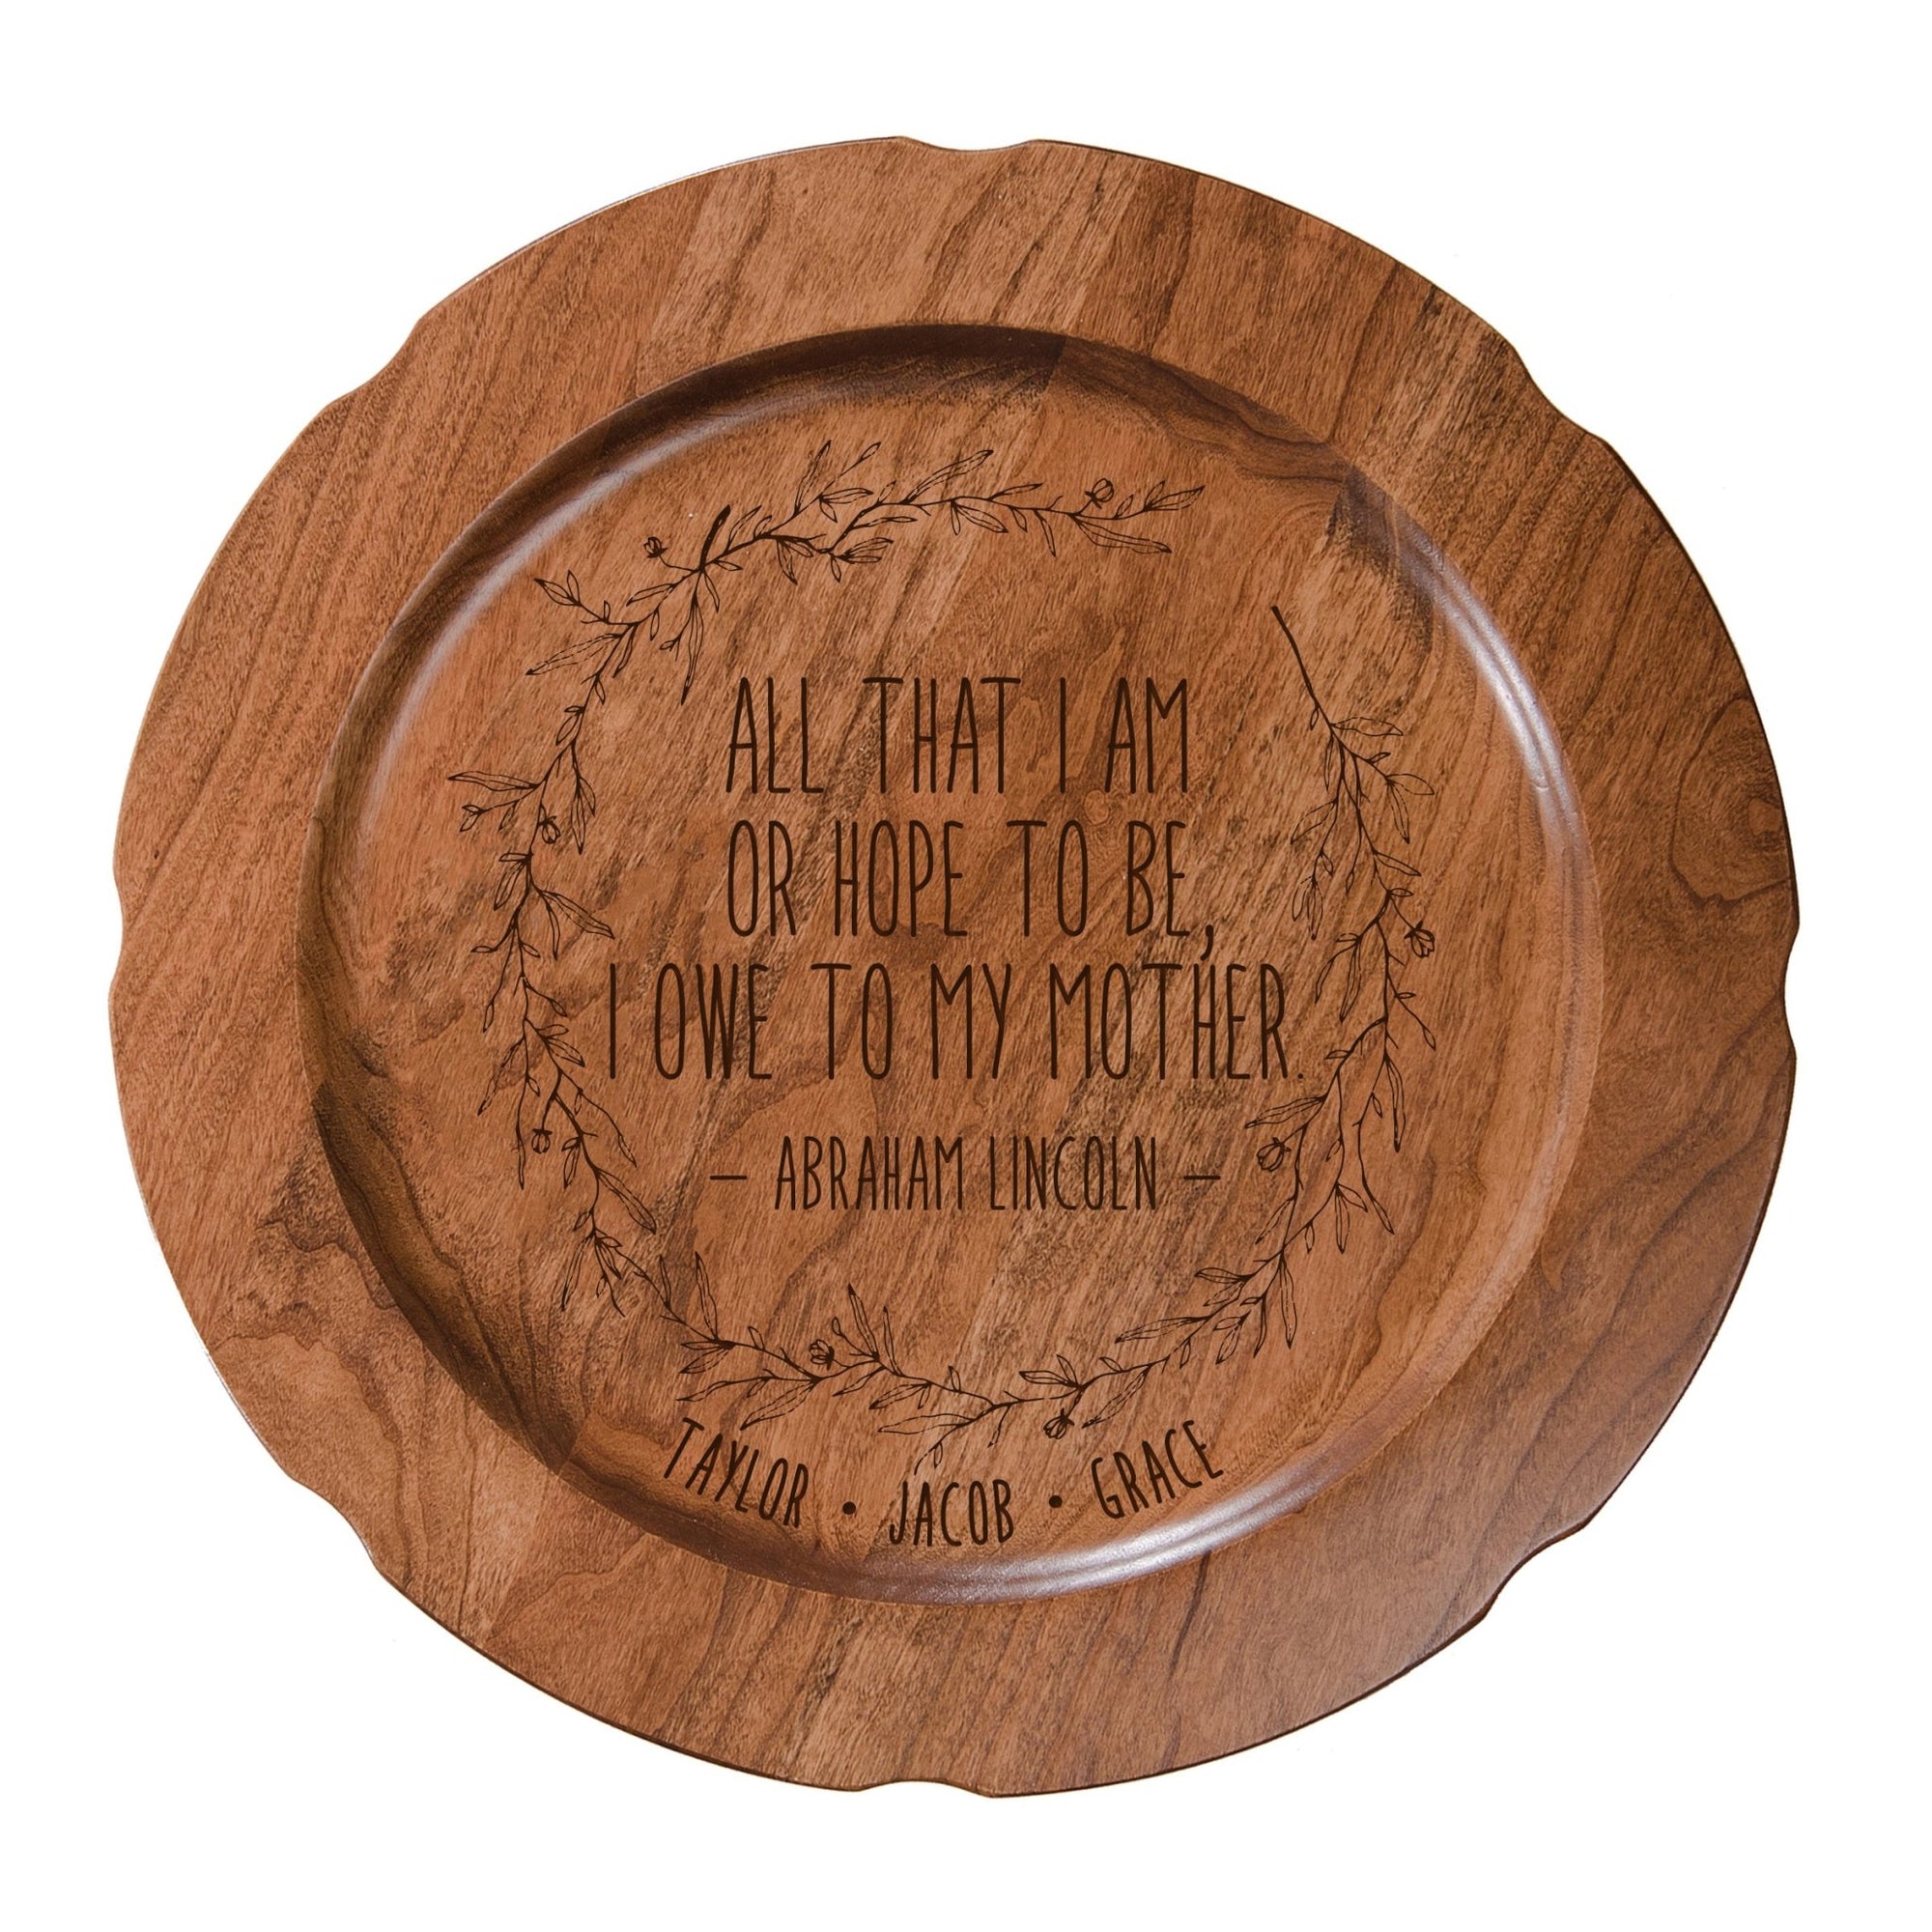 Personalized Mother's Day Cherry Wooden Plates - All That I Am - LifeSong Milestones